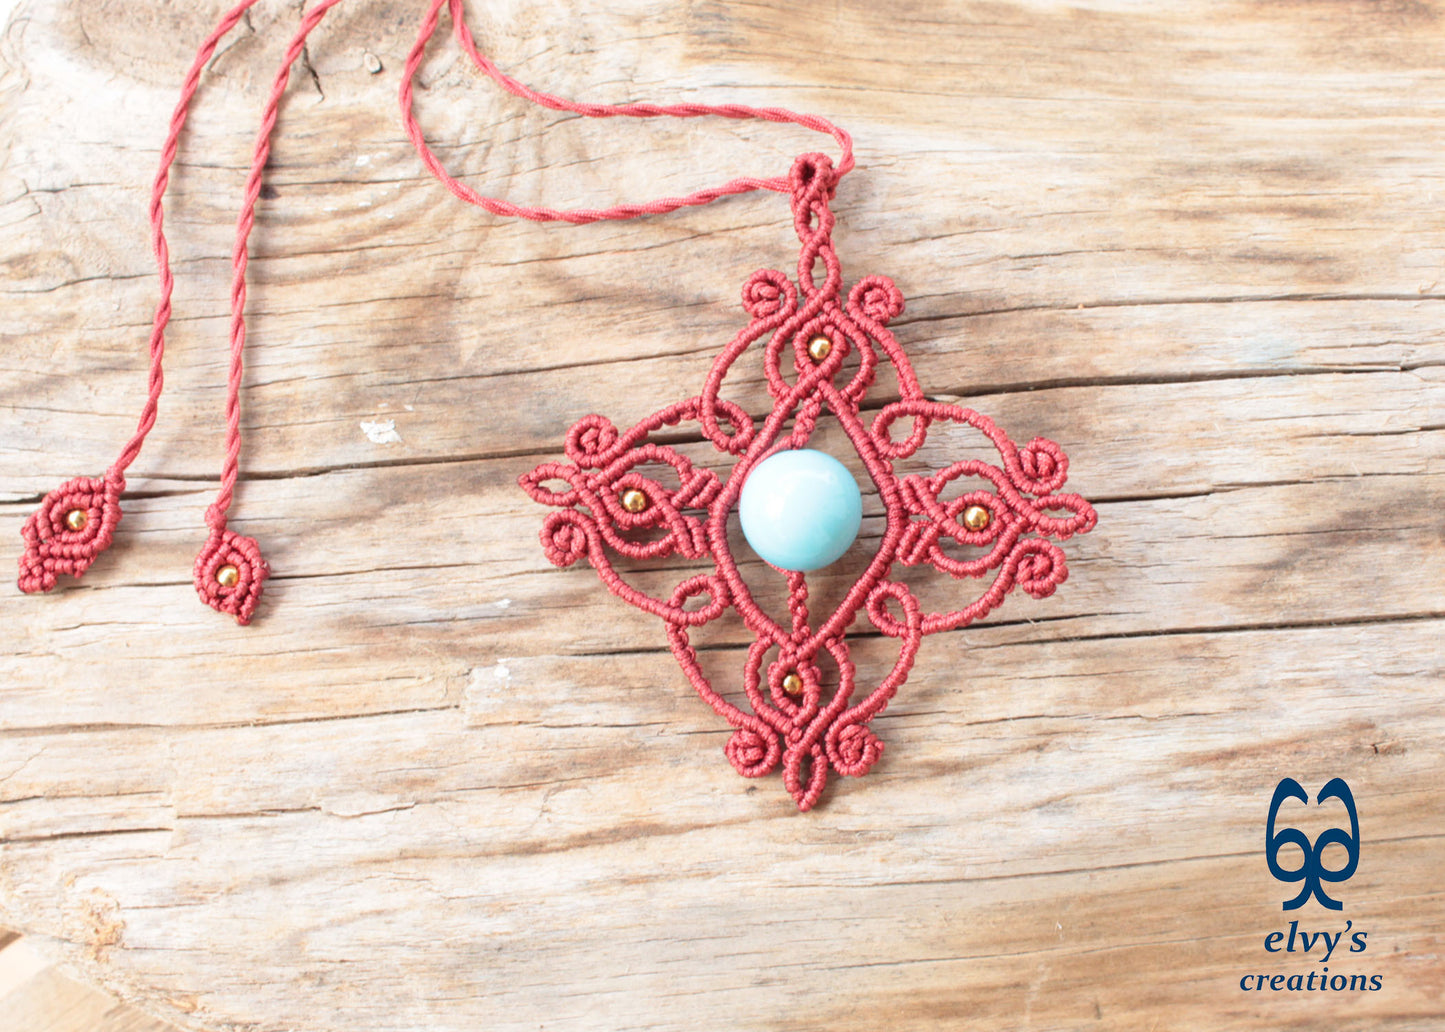 Handmade Clay Red Macramé Necklace with Blue Turquoise Gemstones